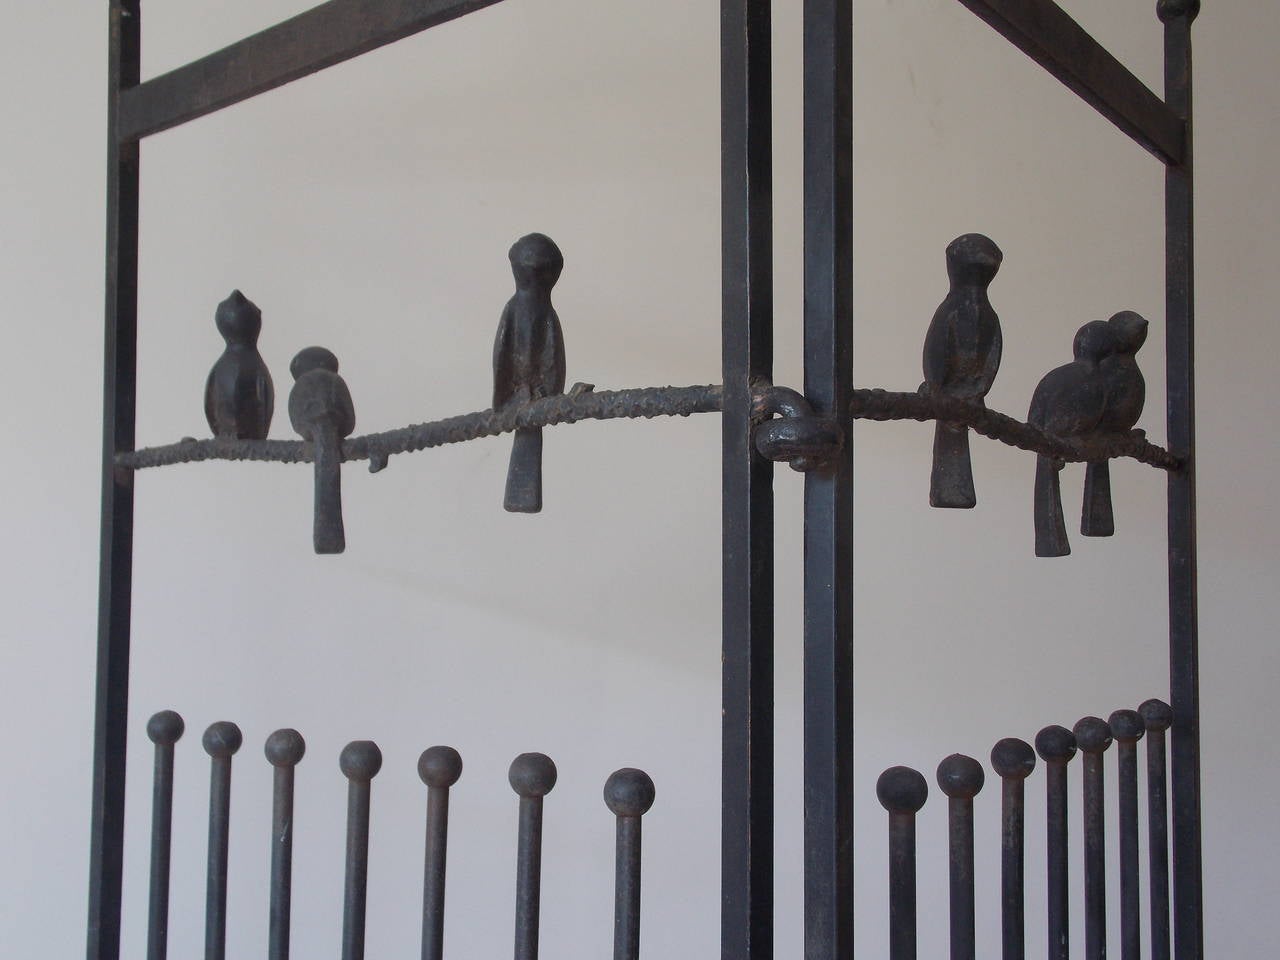 A fun sculptural and decorative design.
Great to use indoors or out.
Made of cast and welded steel.
One bird is missing its' tail.
Other than that, it's still solid and sturdy.